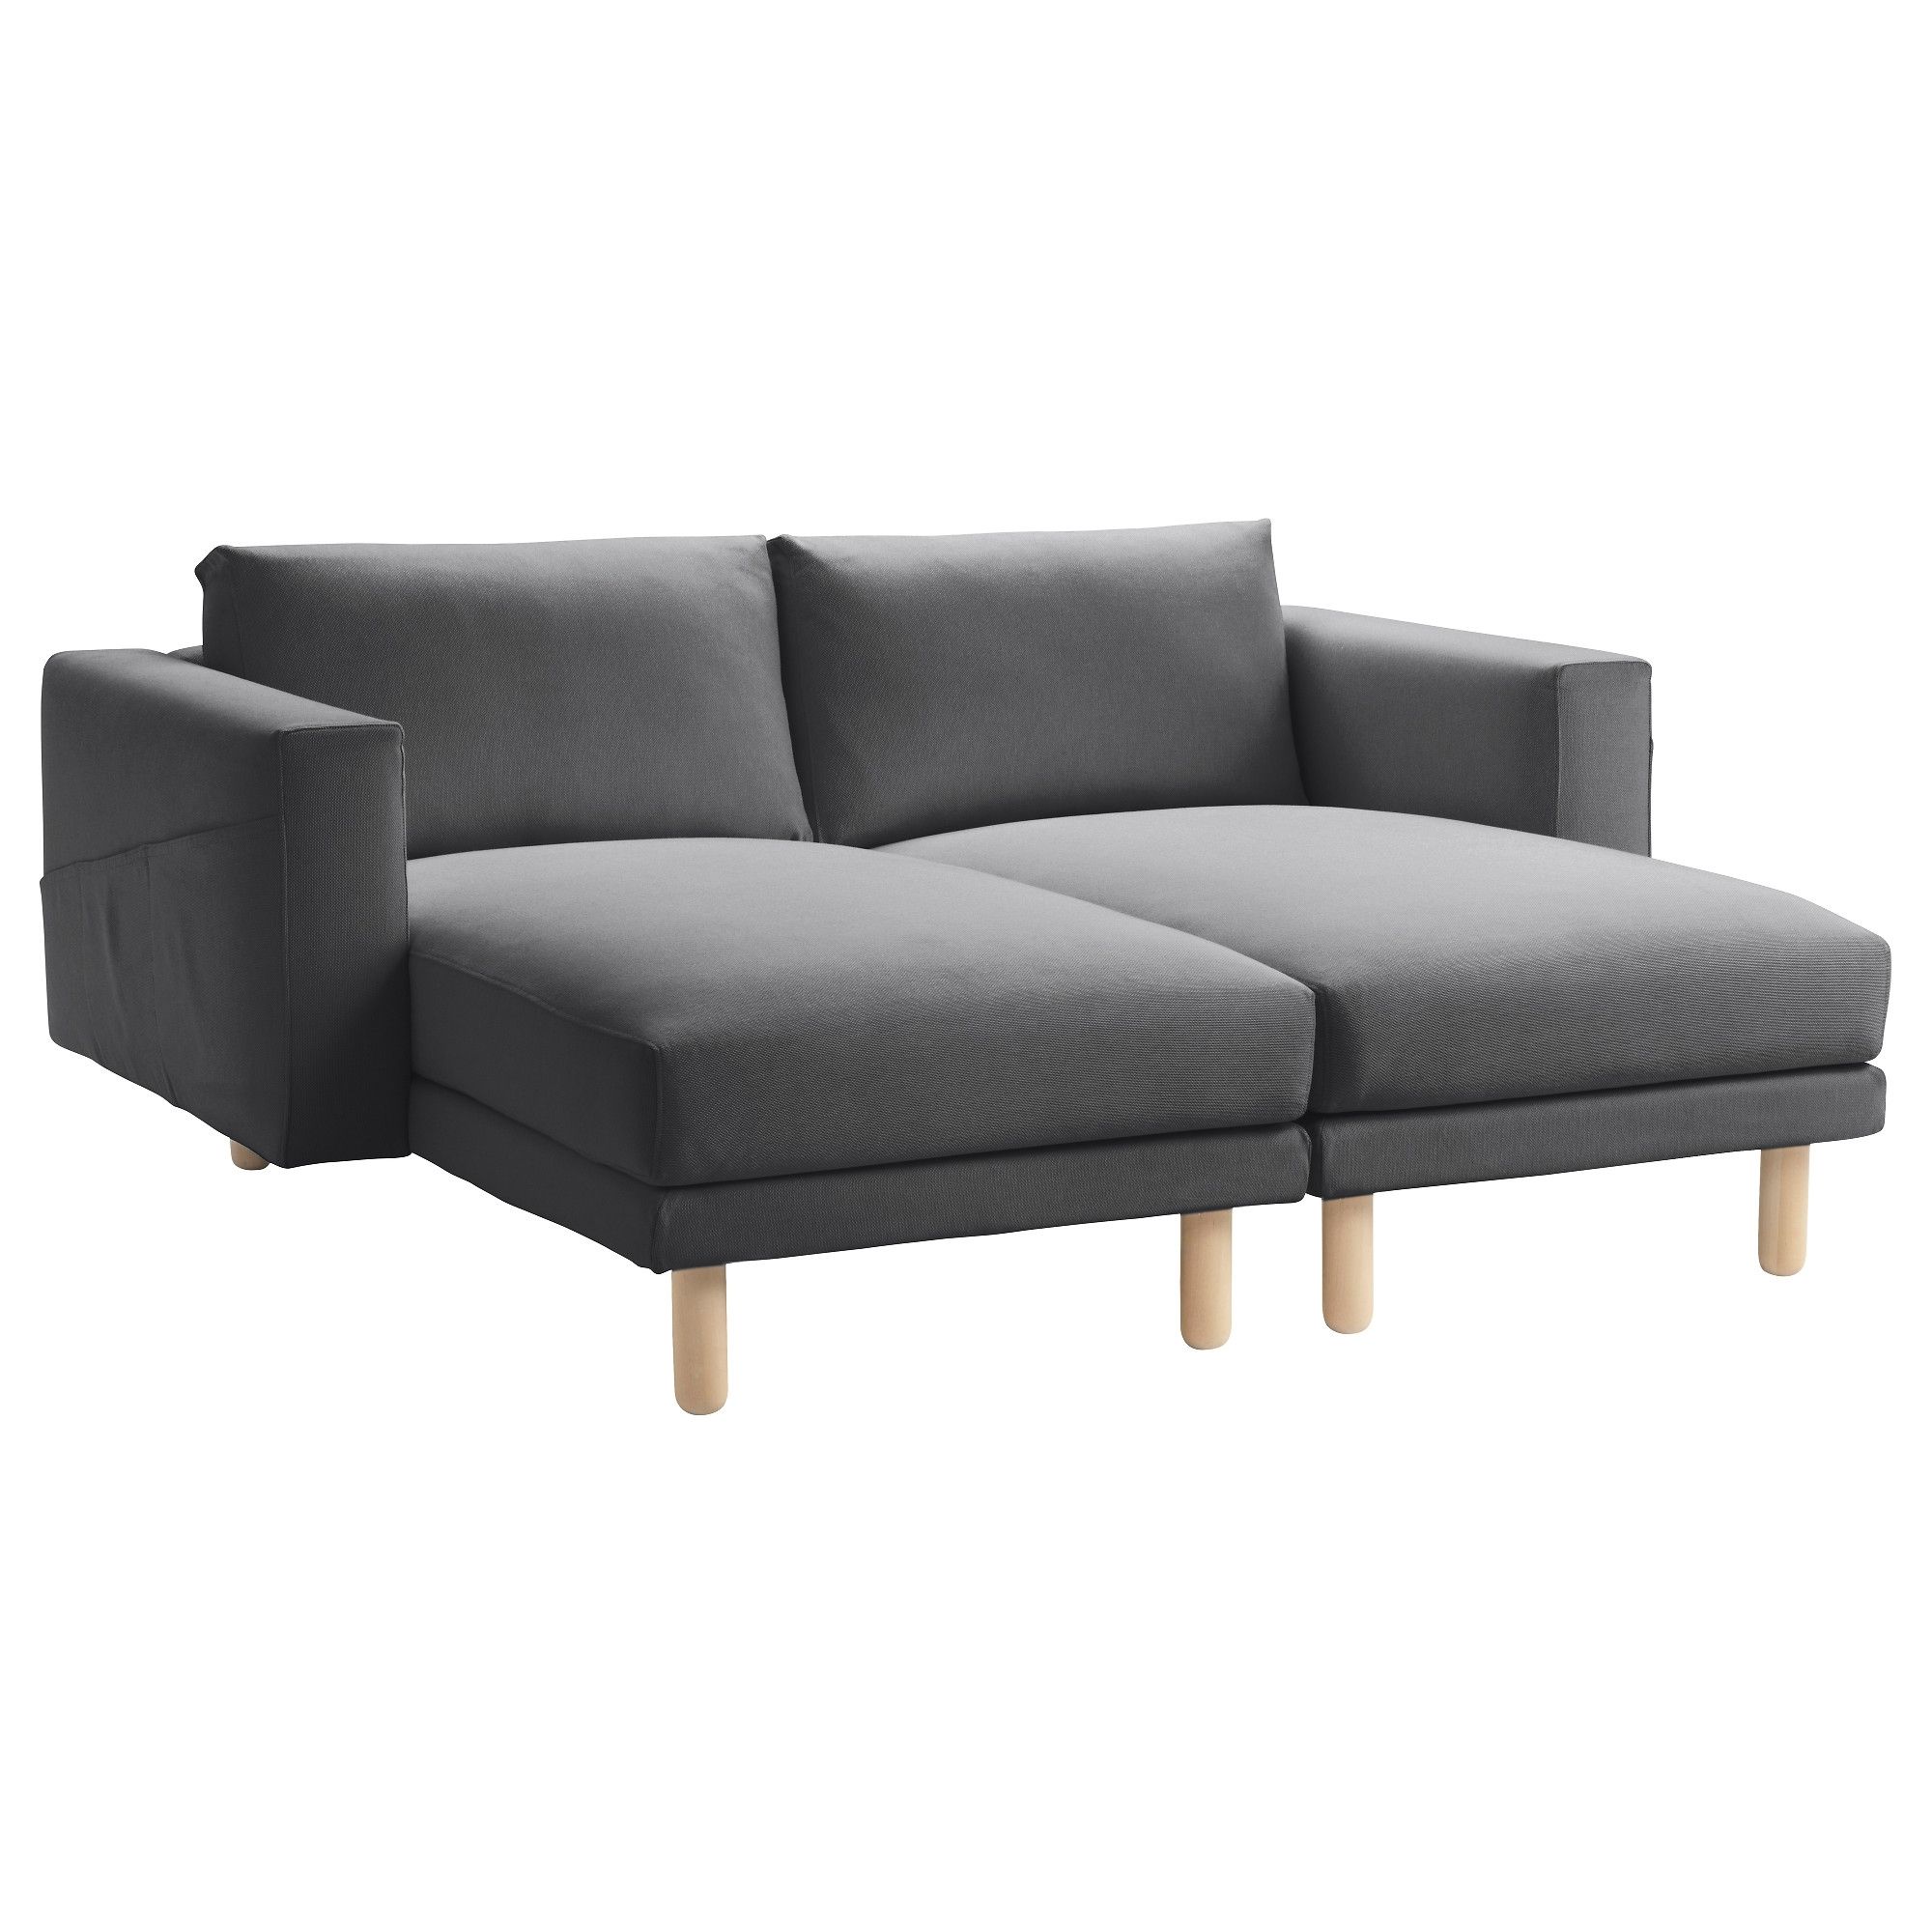 Norsborg Sectional, 2 Seat – Finnsta Dark Gray – Ikea Inside Most Recent Loveseats With Chaise Lounge (View 5 of 15)